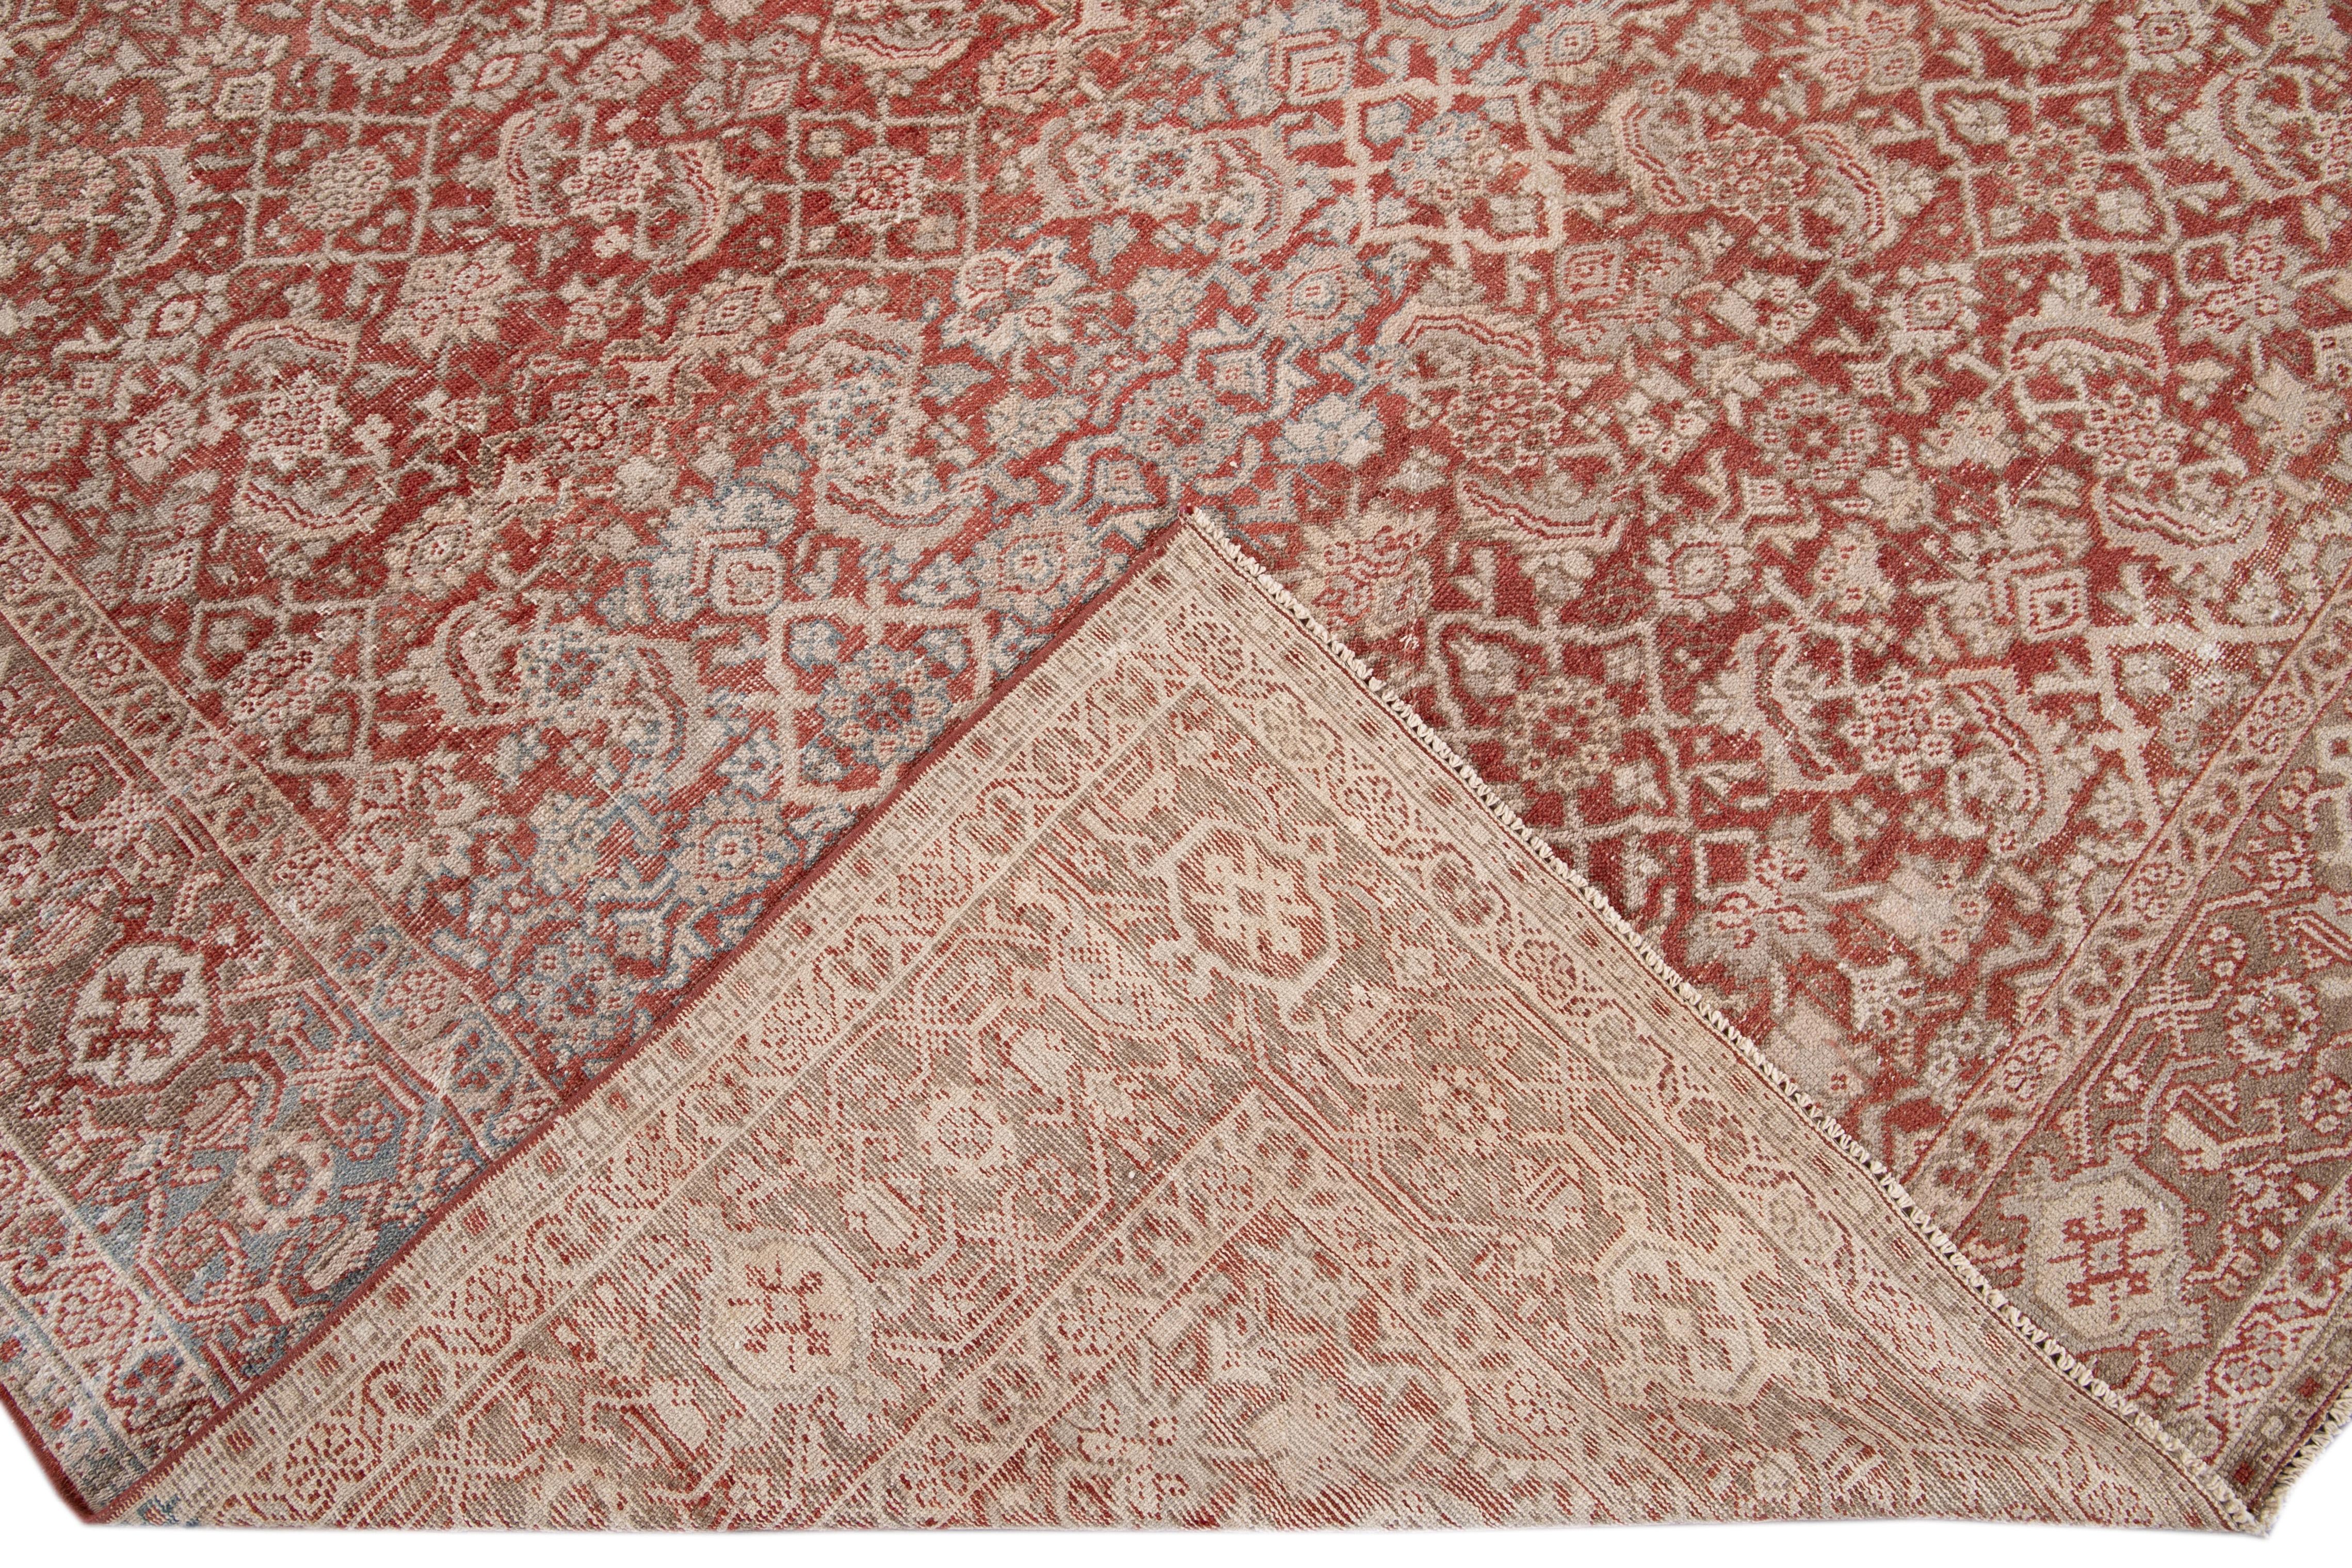 Beautiful antique Mahal hand knotted wool rug with a red field. This Mahal rug has a brown frame Ivory, brown, and blue accents in a gorgeous all-over geometric floral botanical design.

This rug measures 9'5